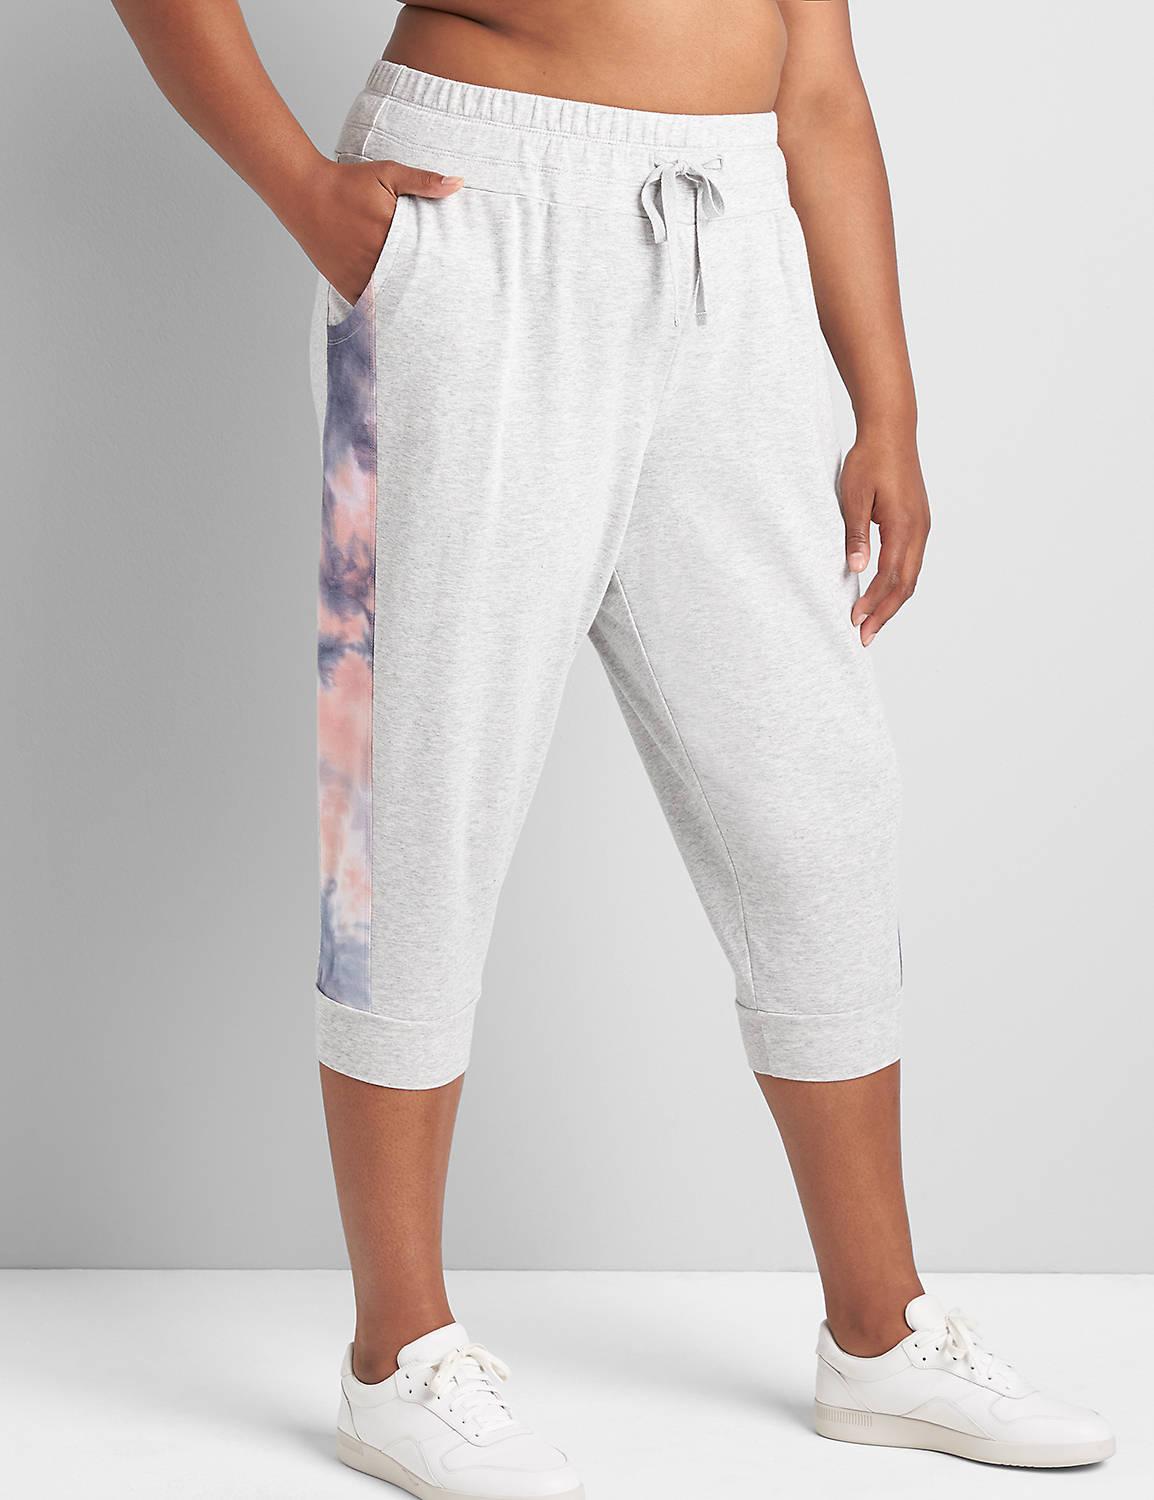 LIVI Mid Rise French Terry Capri Jogger Dye Effect Blocked 1122999:Grey Heather:38/40 Product Image 1